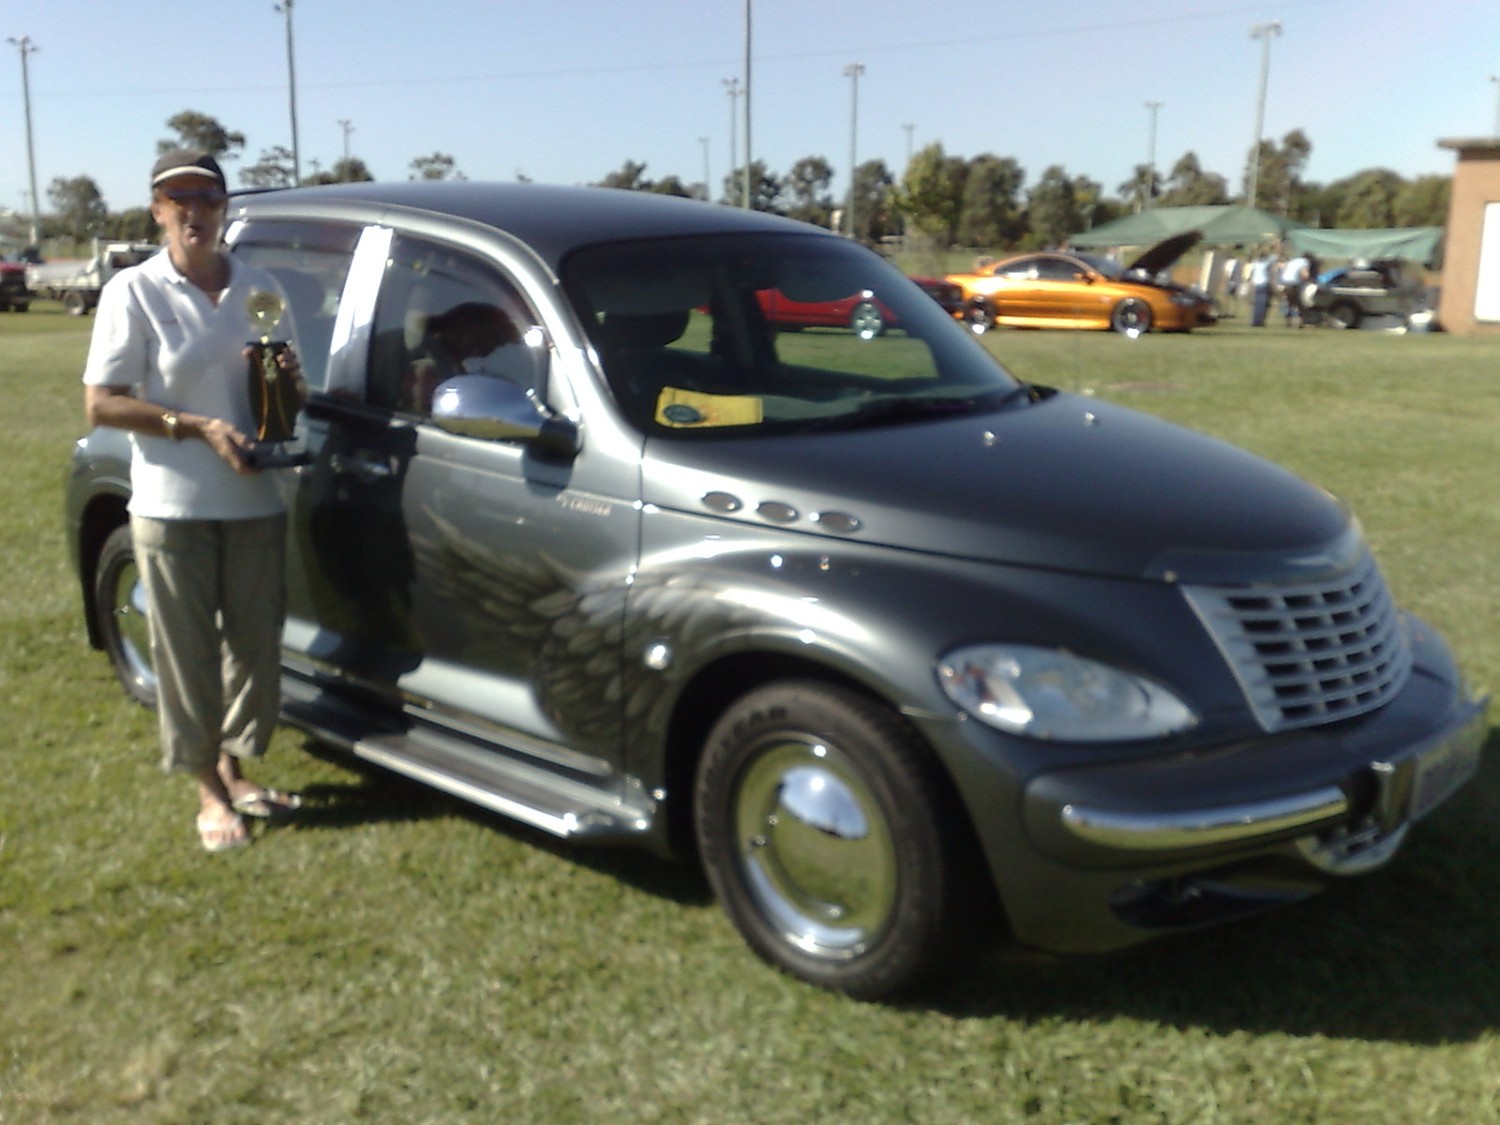 2001 Chrysler PT CRUISER CLASSIC PTDarkwing Shannons Club